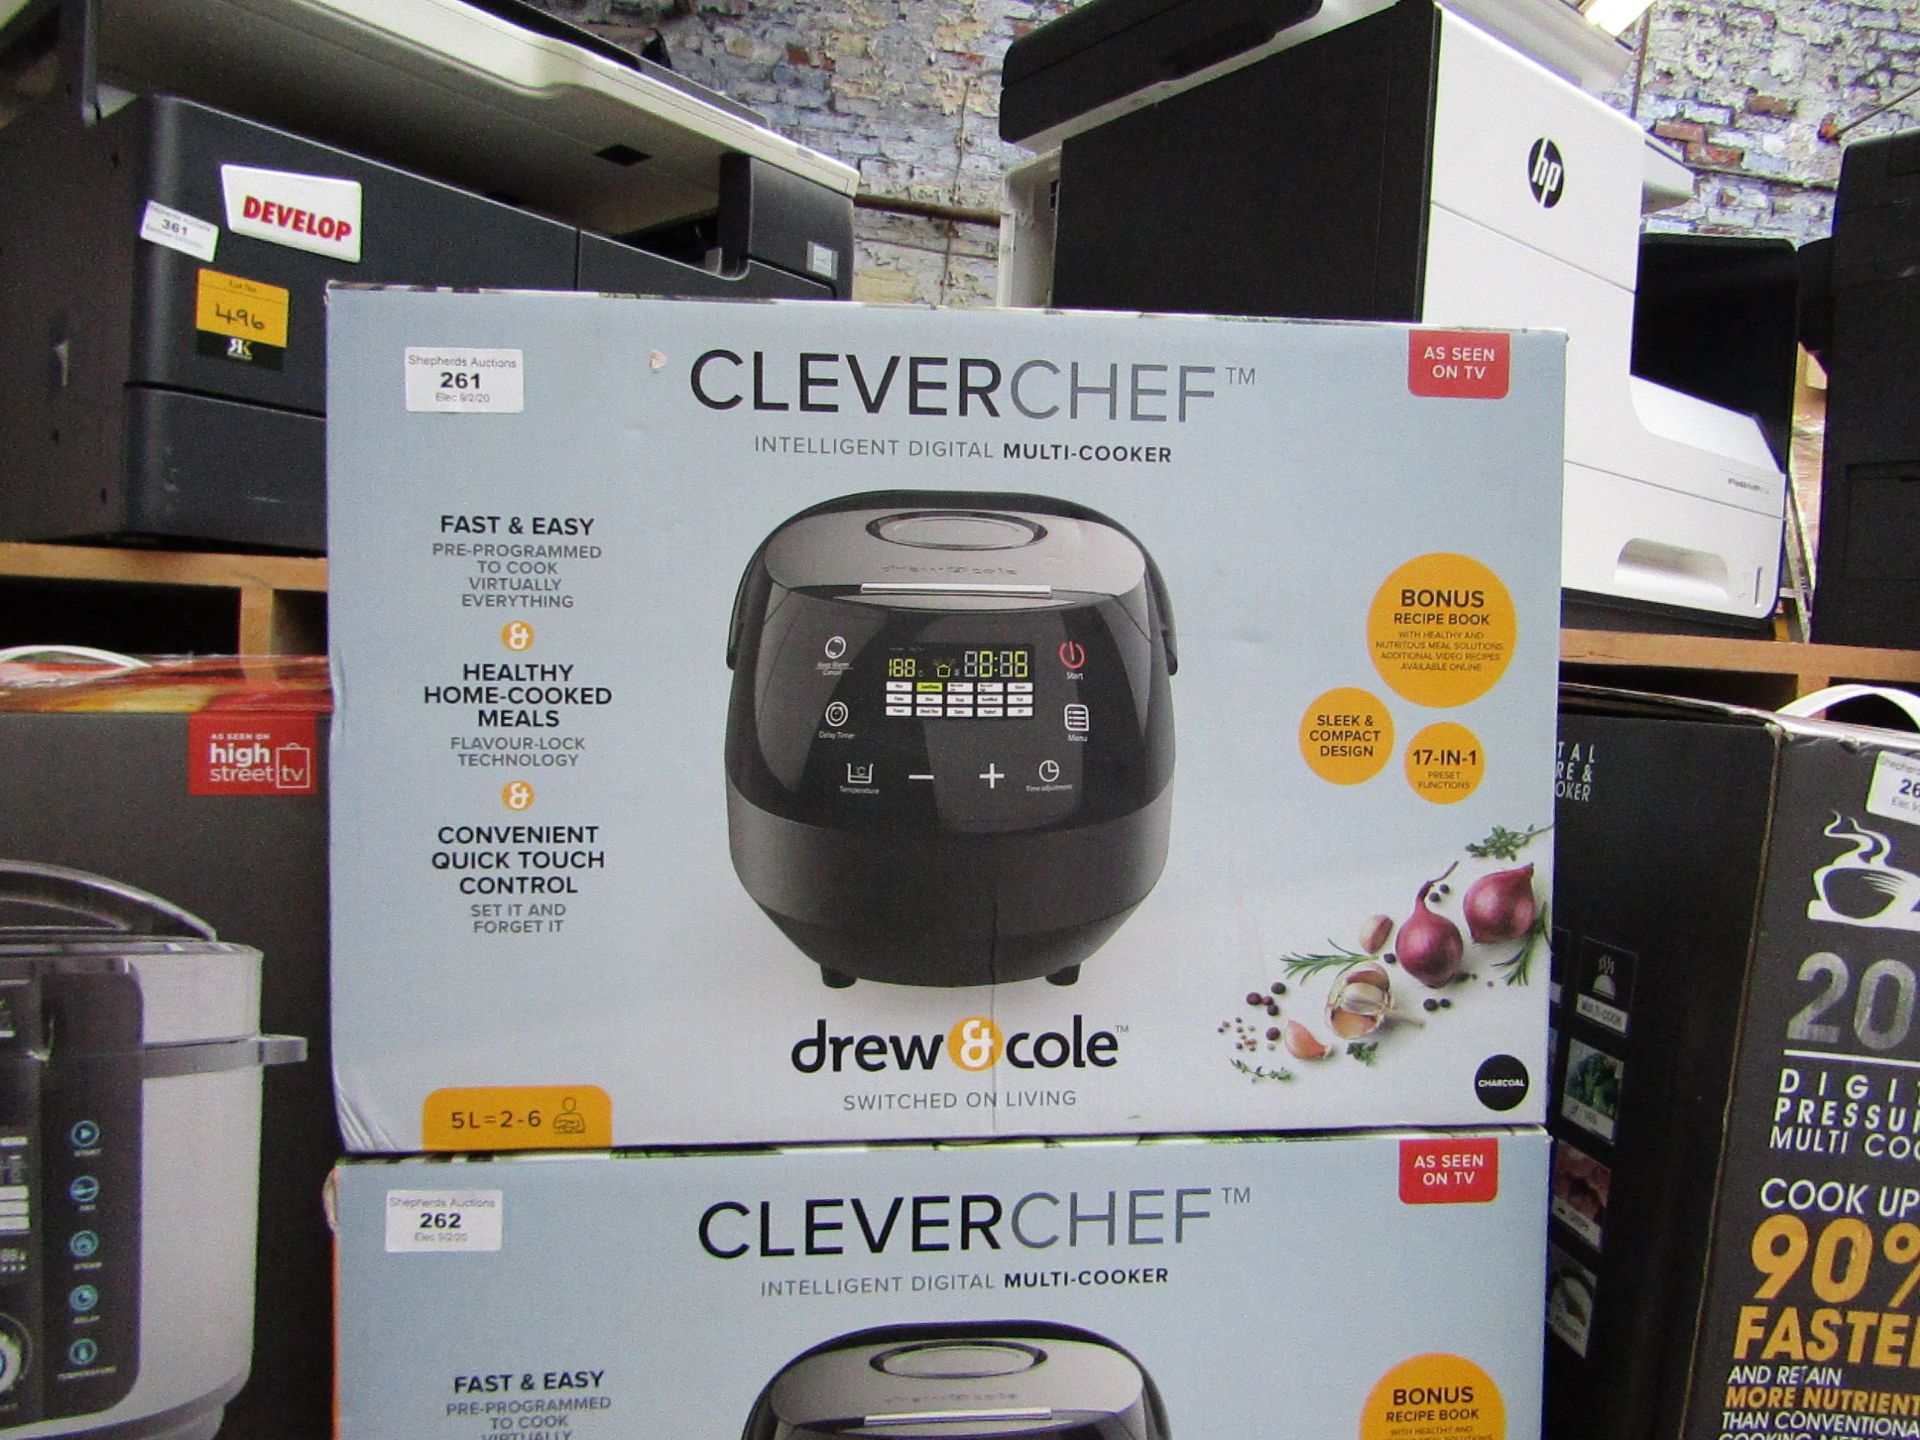 | 1x | DREW & COLE CLEVERCHEF | PAT TESTED AND BOXED | NO ONLINE RE-SALE | SKU C5060541511682 |